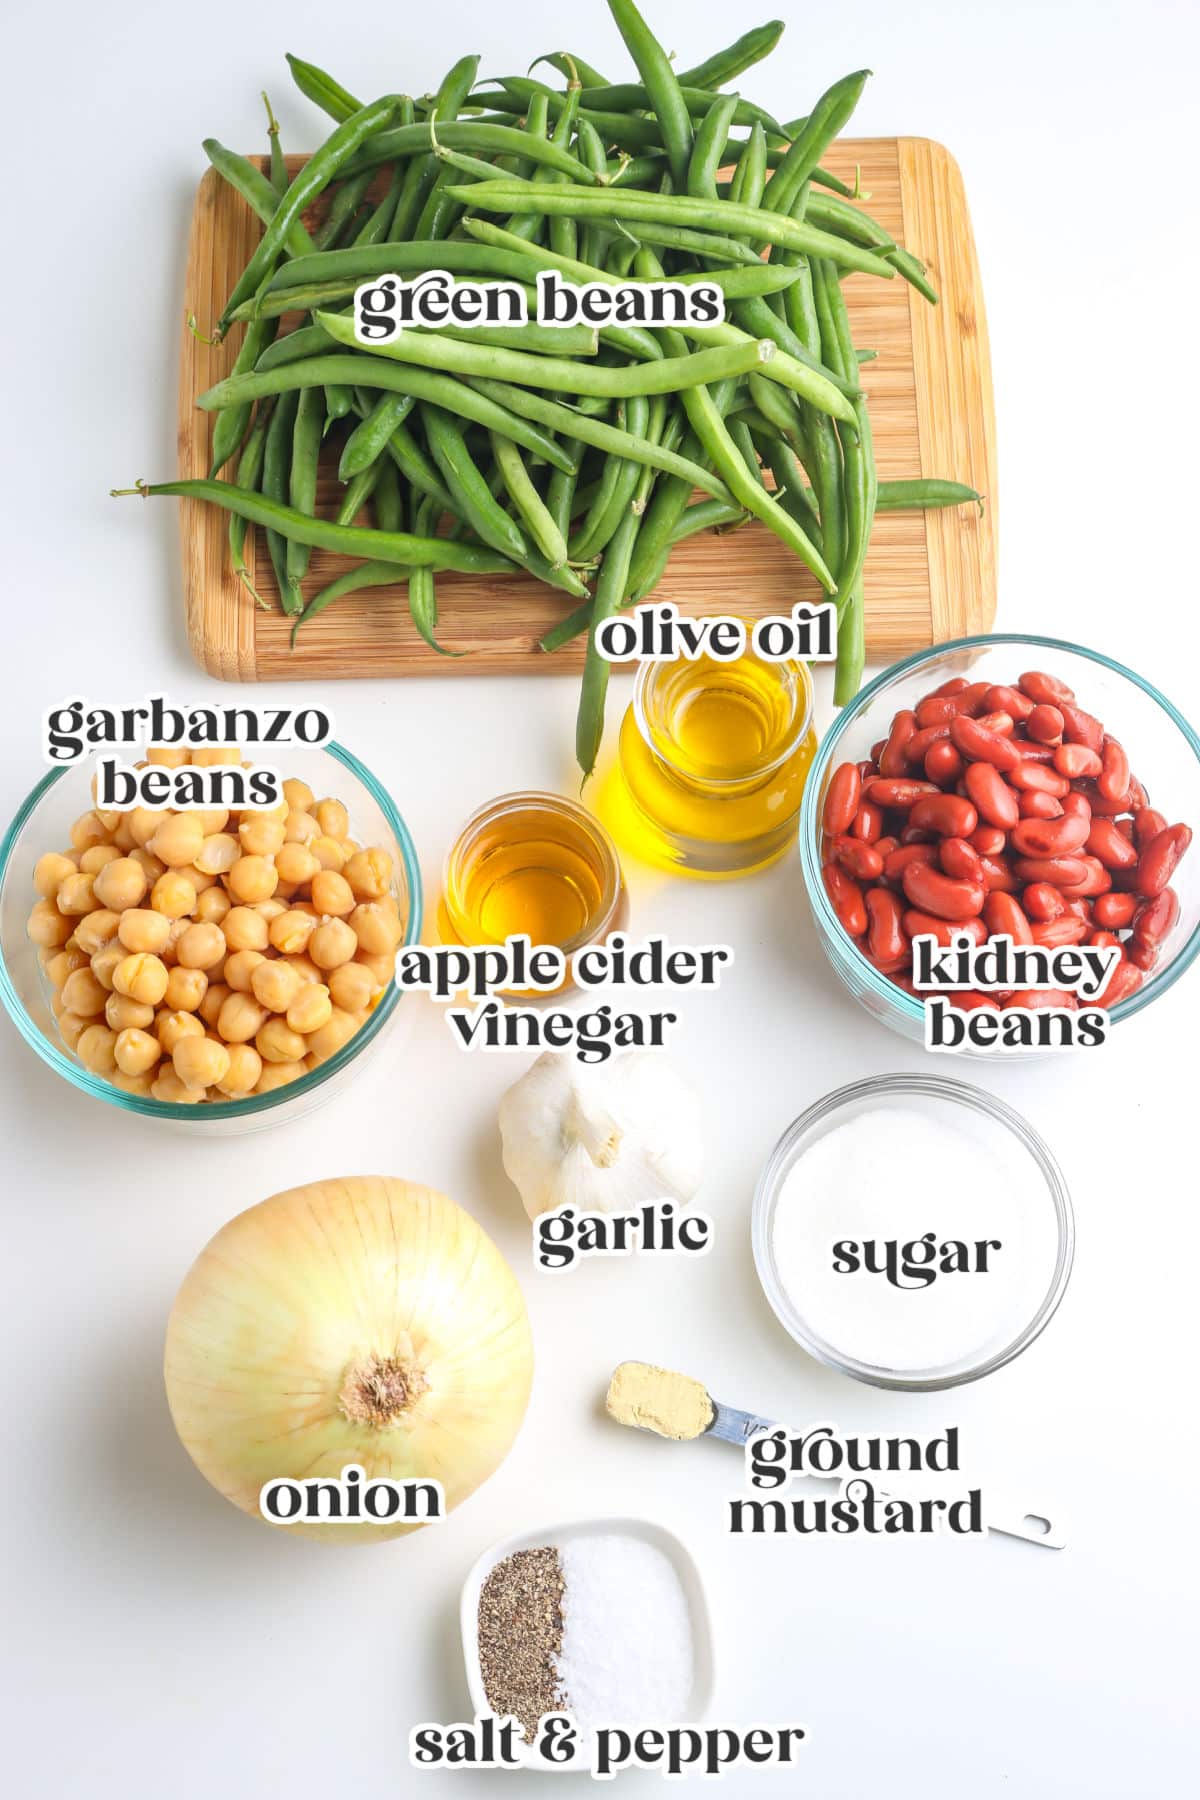 All ingredients needed to make this recipe that are labeled with text overlay.